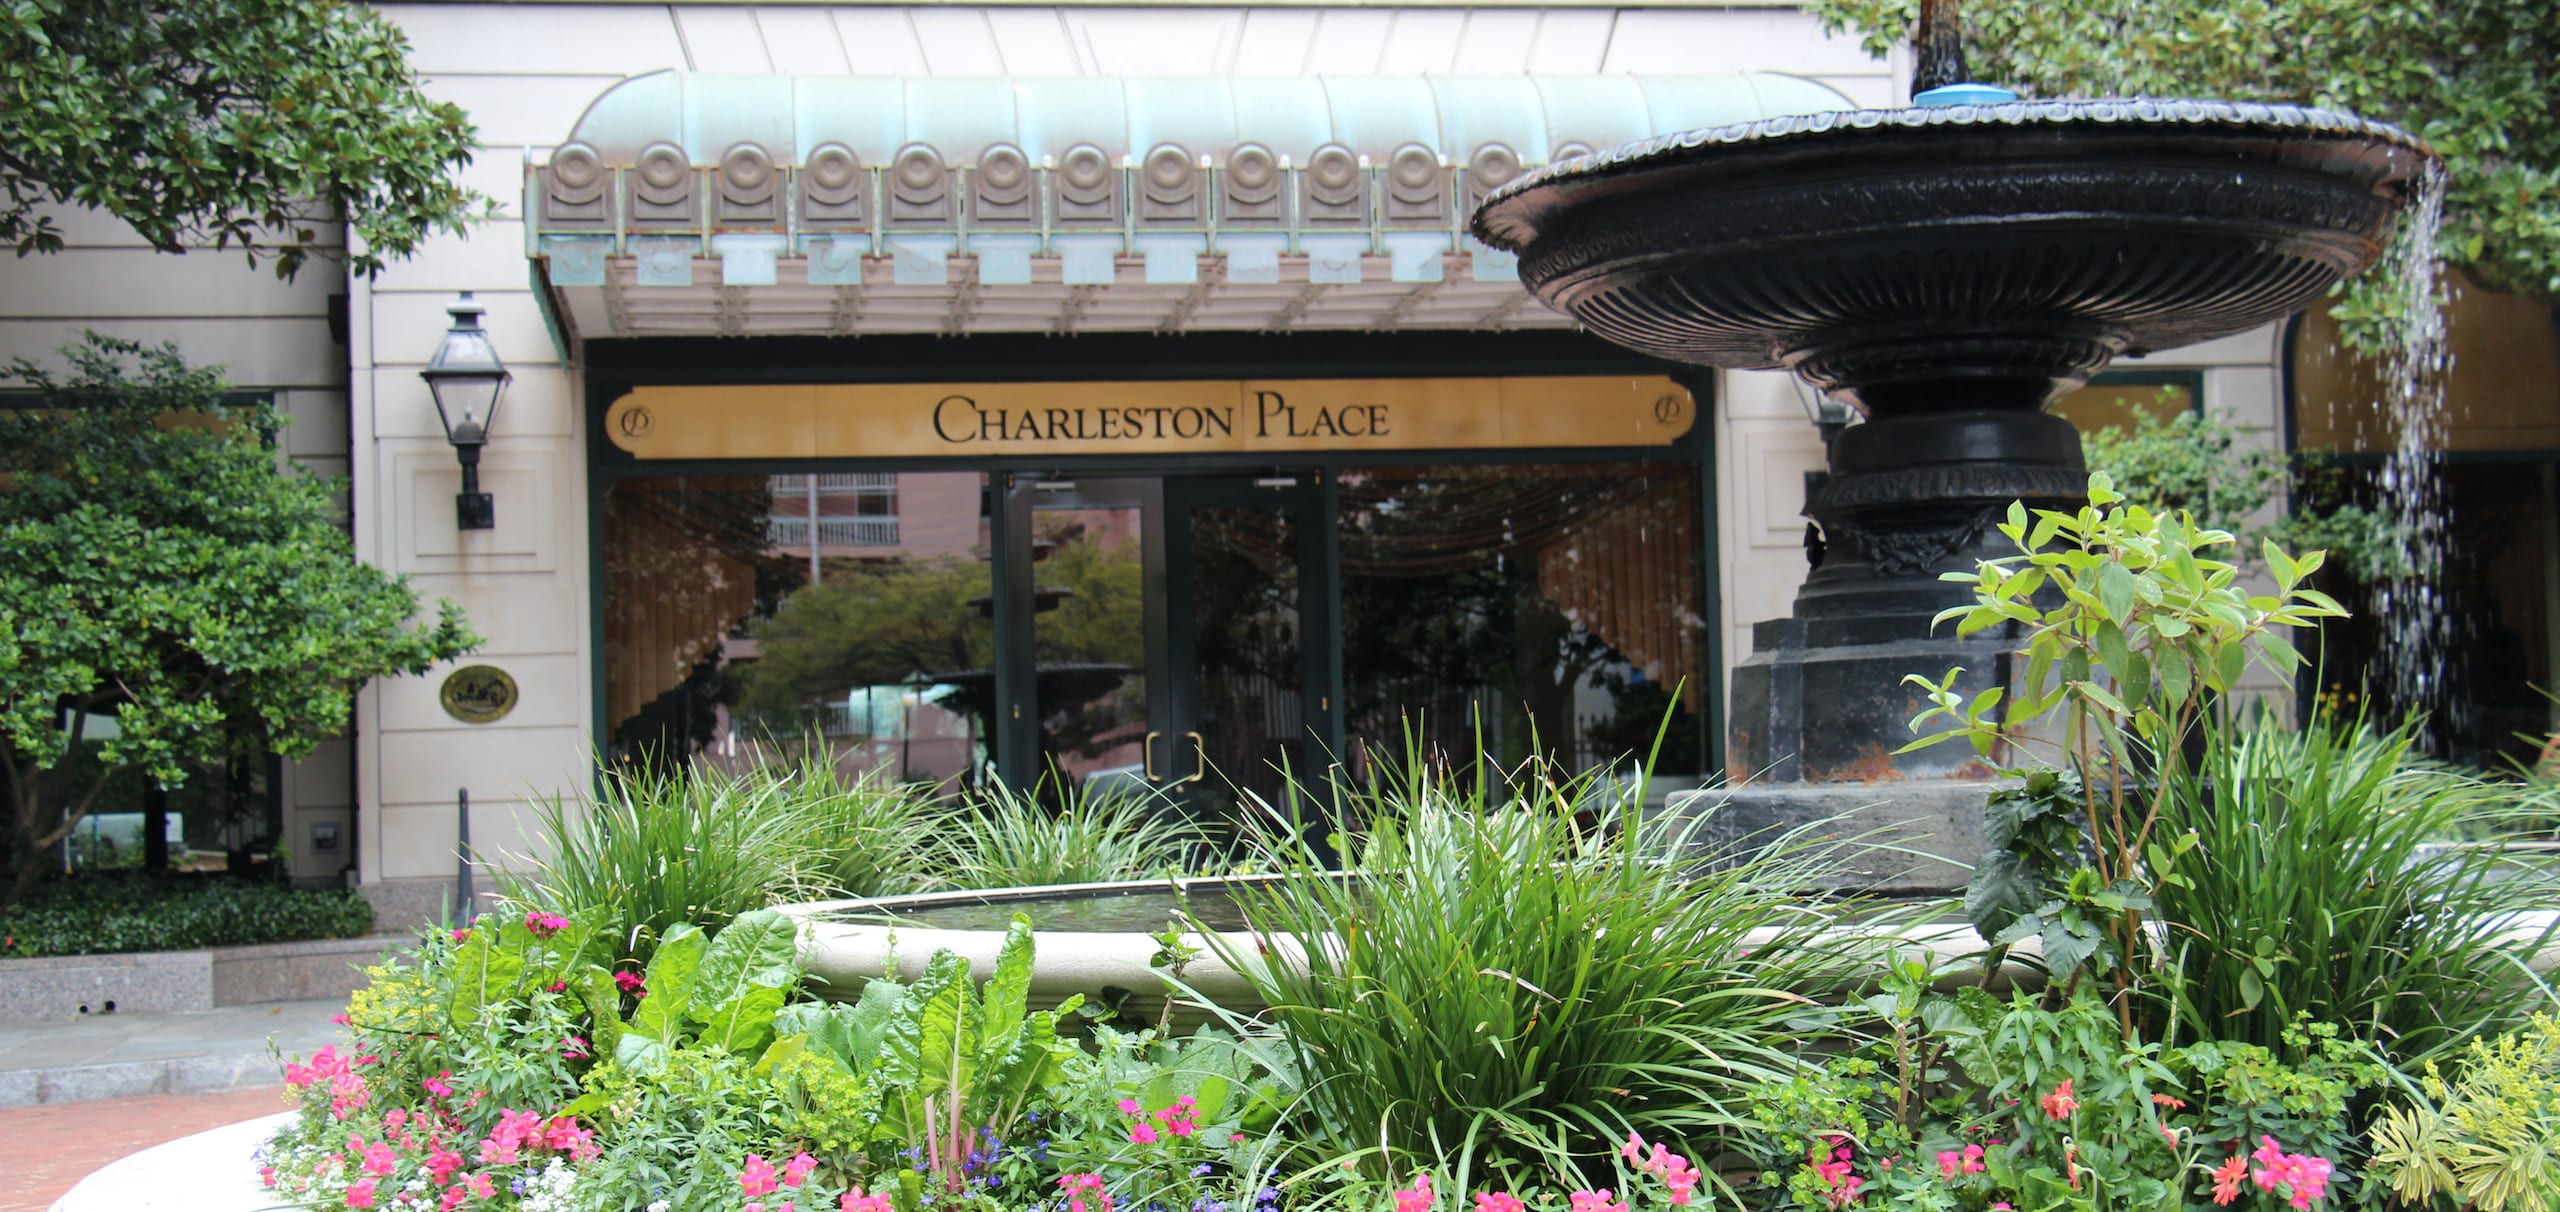 Belmond Charleston Place is one of the best places to stay in Charleston